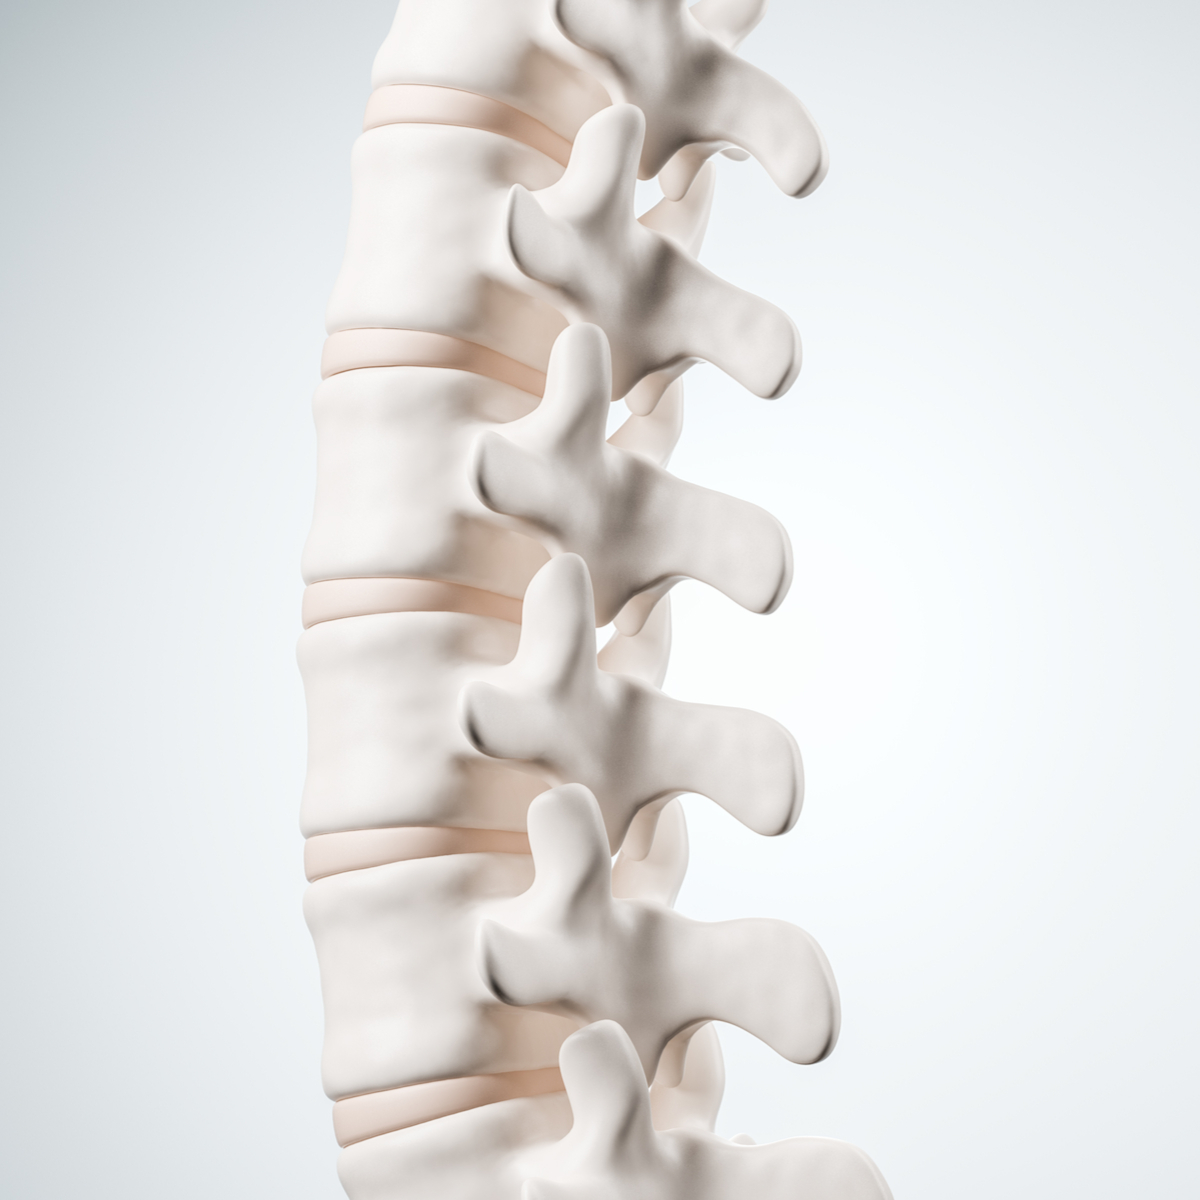 Johnstone Chiropractic Offers the Best Chiropractic Adjustments for Spine & Joint Alignment in Stanwood!